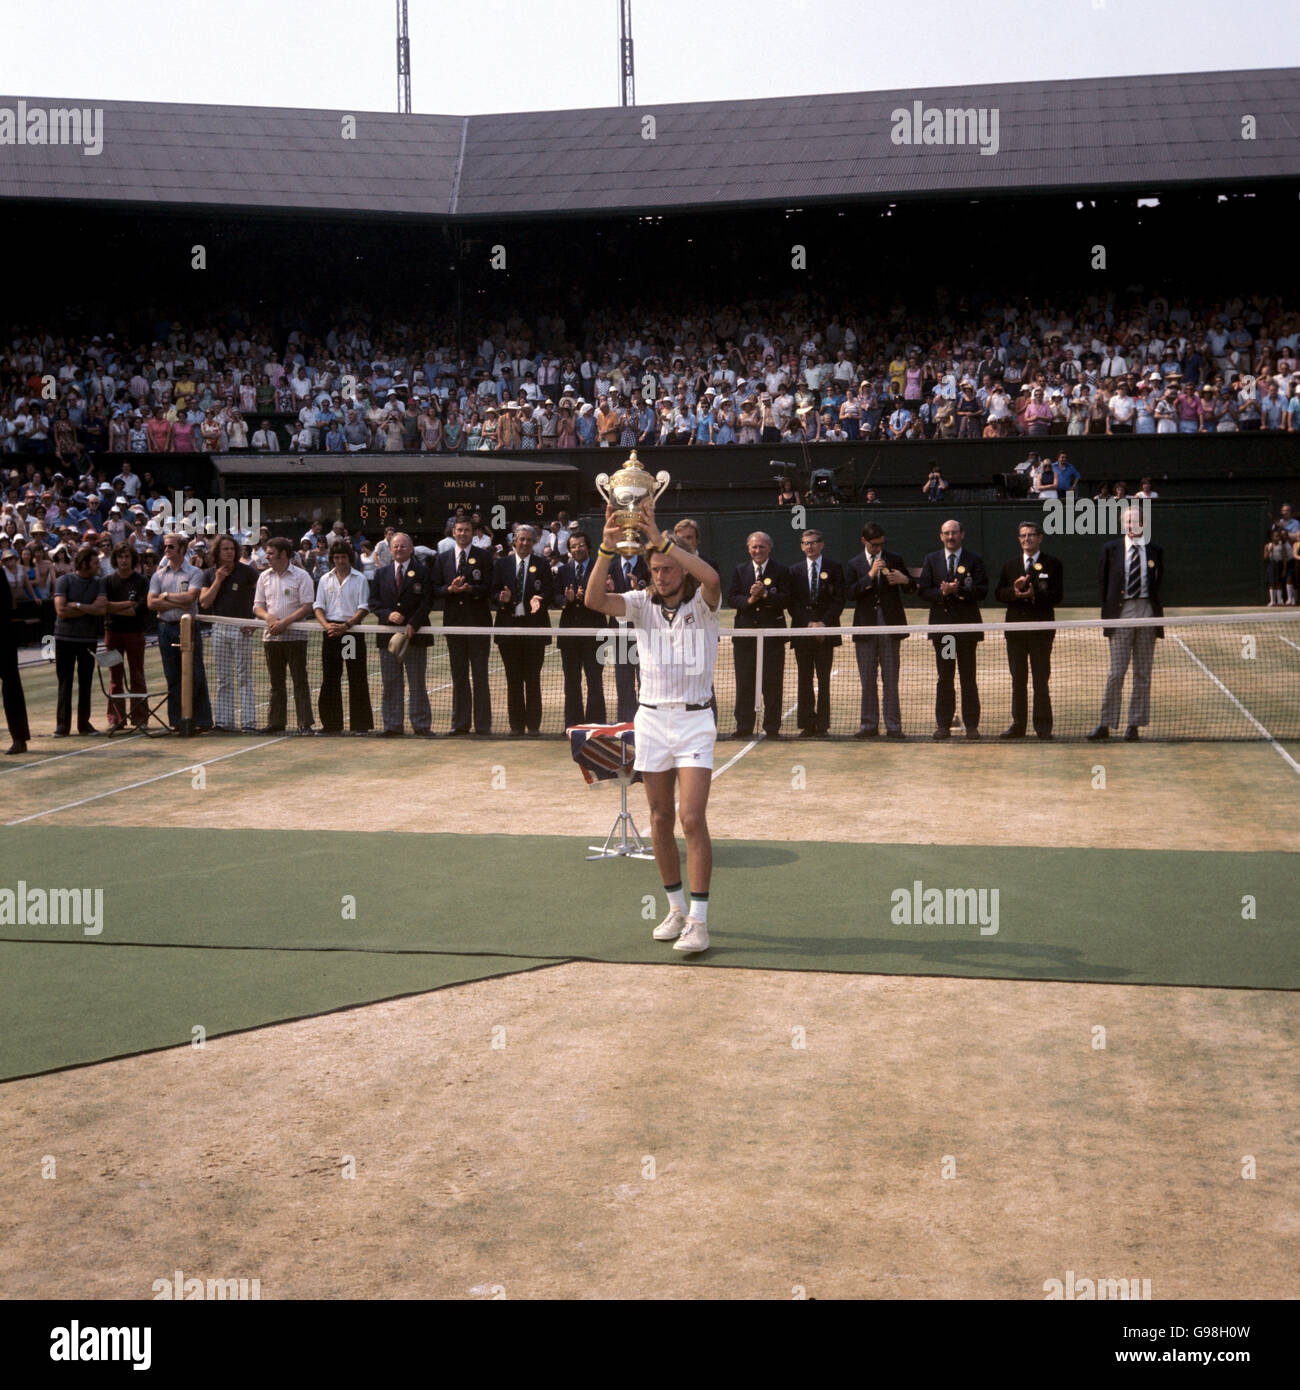 Tennis - Wimbledon Championships - Men's Singles - Final - Bjorn Borg v Ilie Nastase - The All England Club. Bjorn Borg lifts the men's singles trophy aloft after his straight sets victory Stock Photo